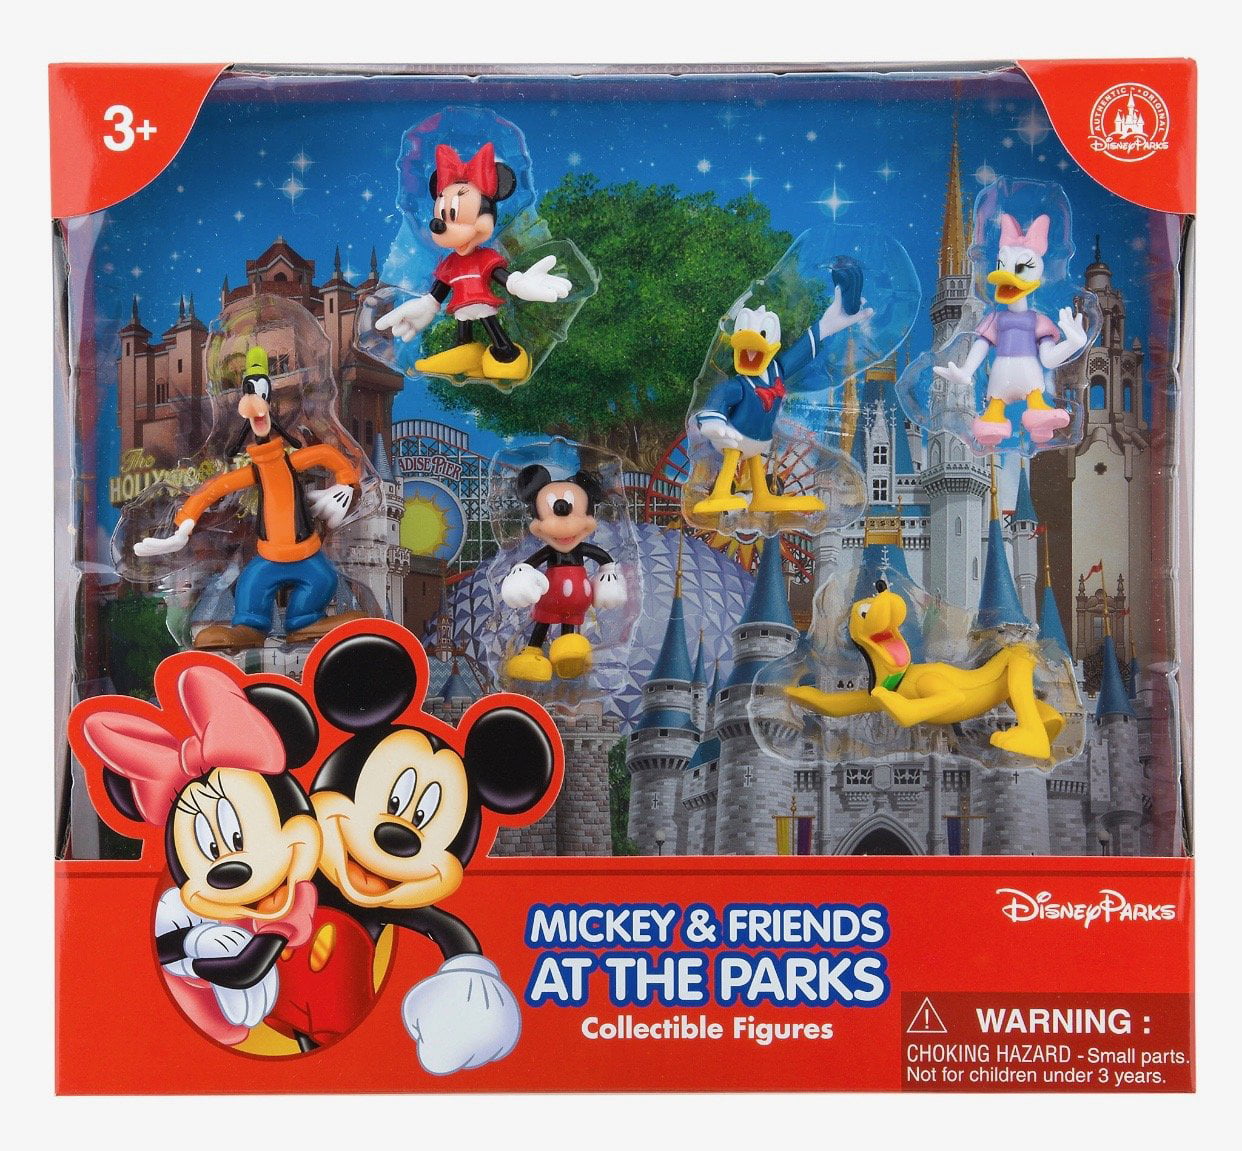 NEW---BUMPER SET--- 4 x MICKEY MOUSE & FRIENDS Birthday Card Making Toppers